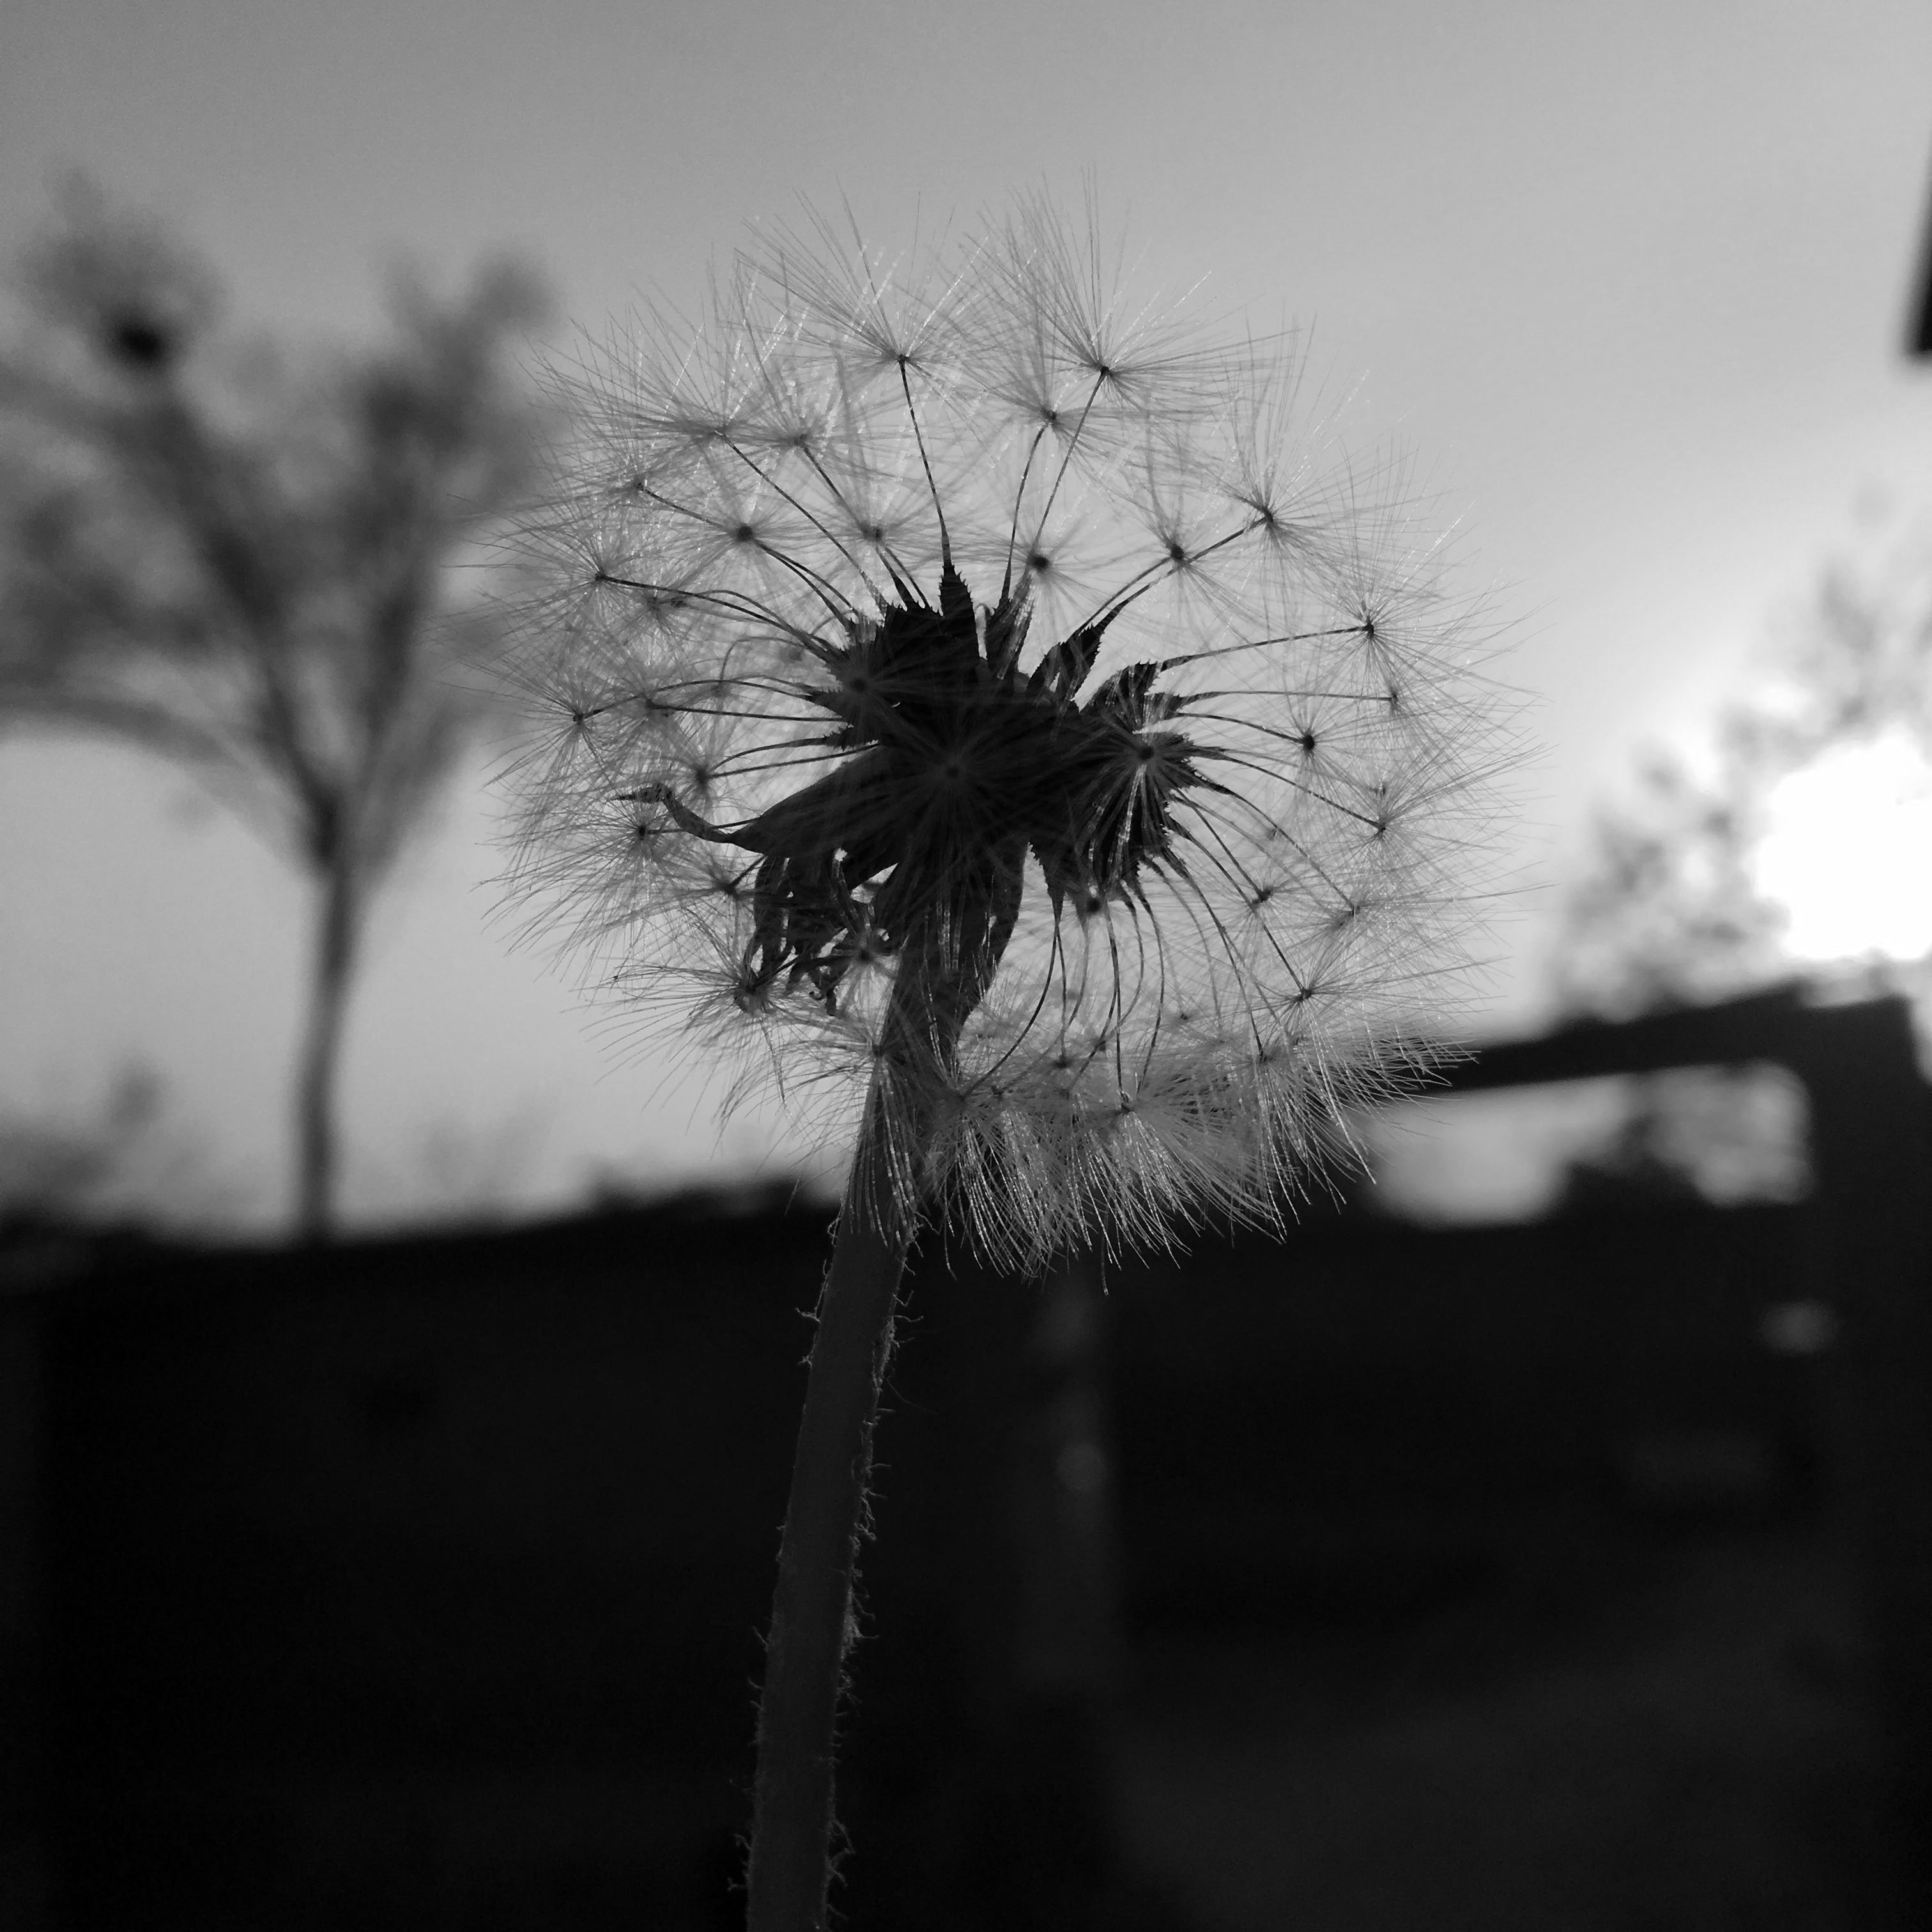 white dandelion under cloudy sky in gray-scale